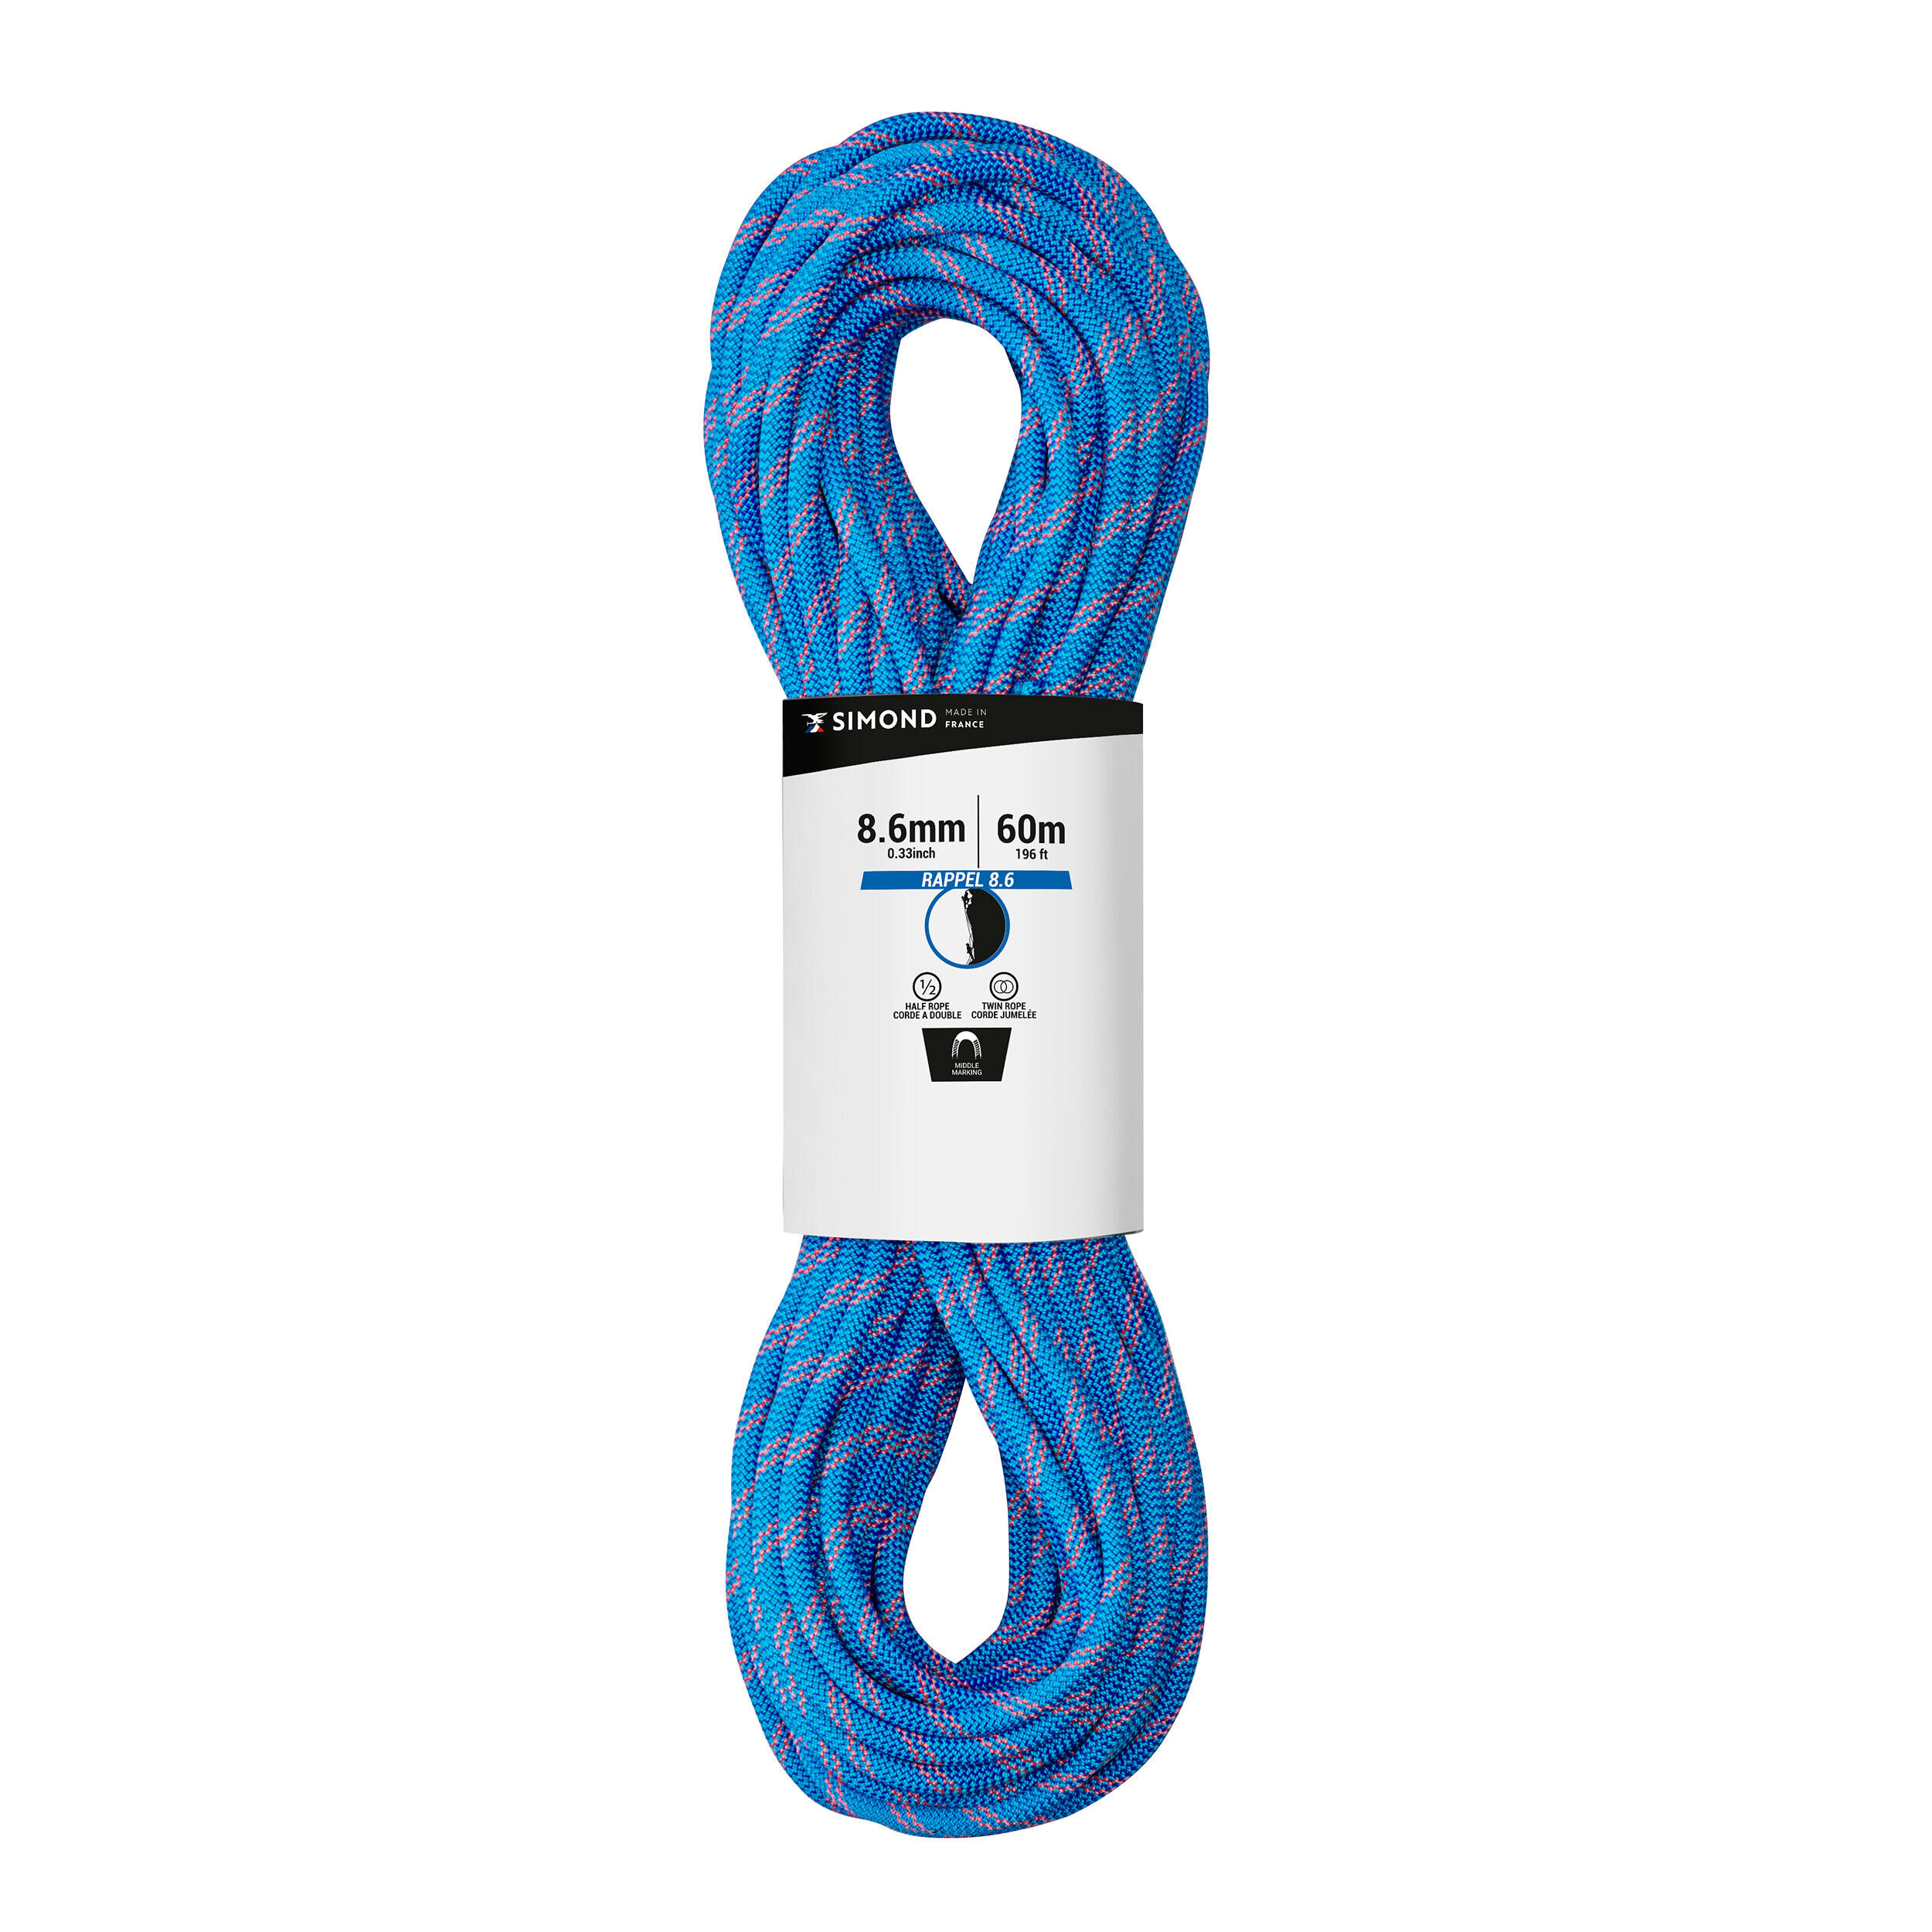 SIMOND Double climbing and mountaineering rope 8.6 mm x 60 m - RAPPEL 8.6 Blue